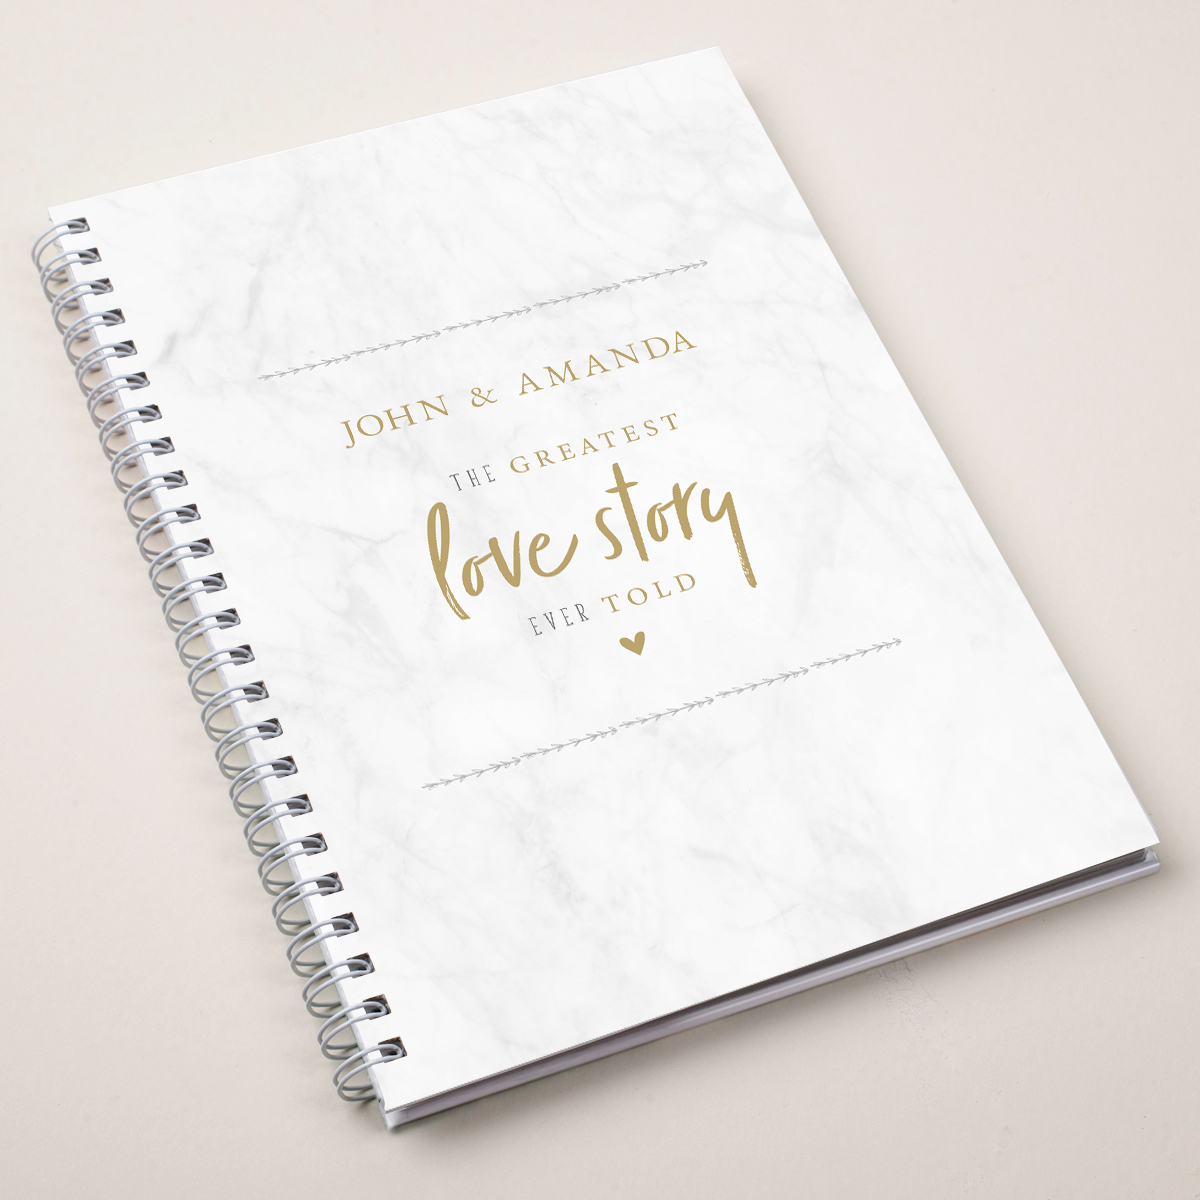 Personalised Notebook - The Greatest Love Story